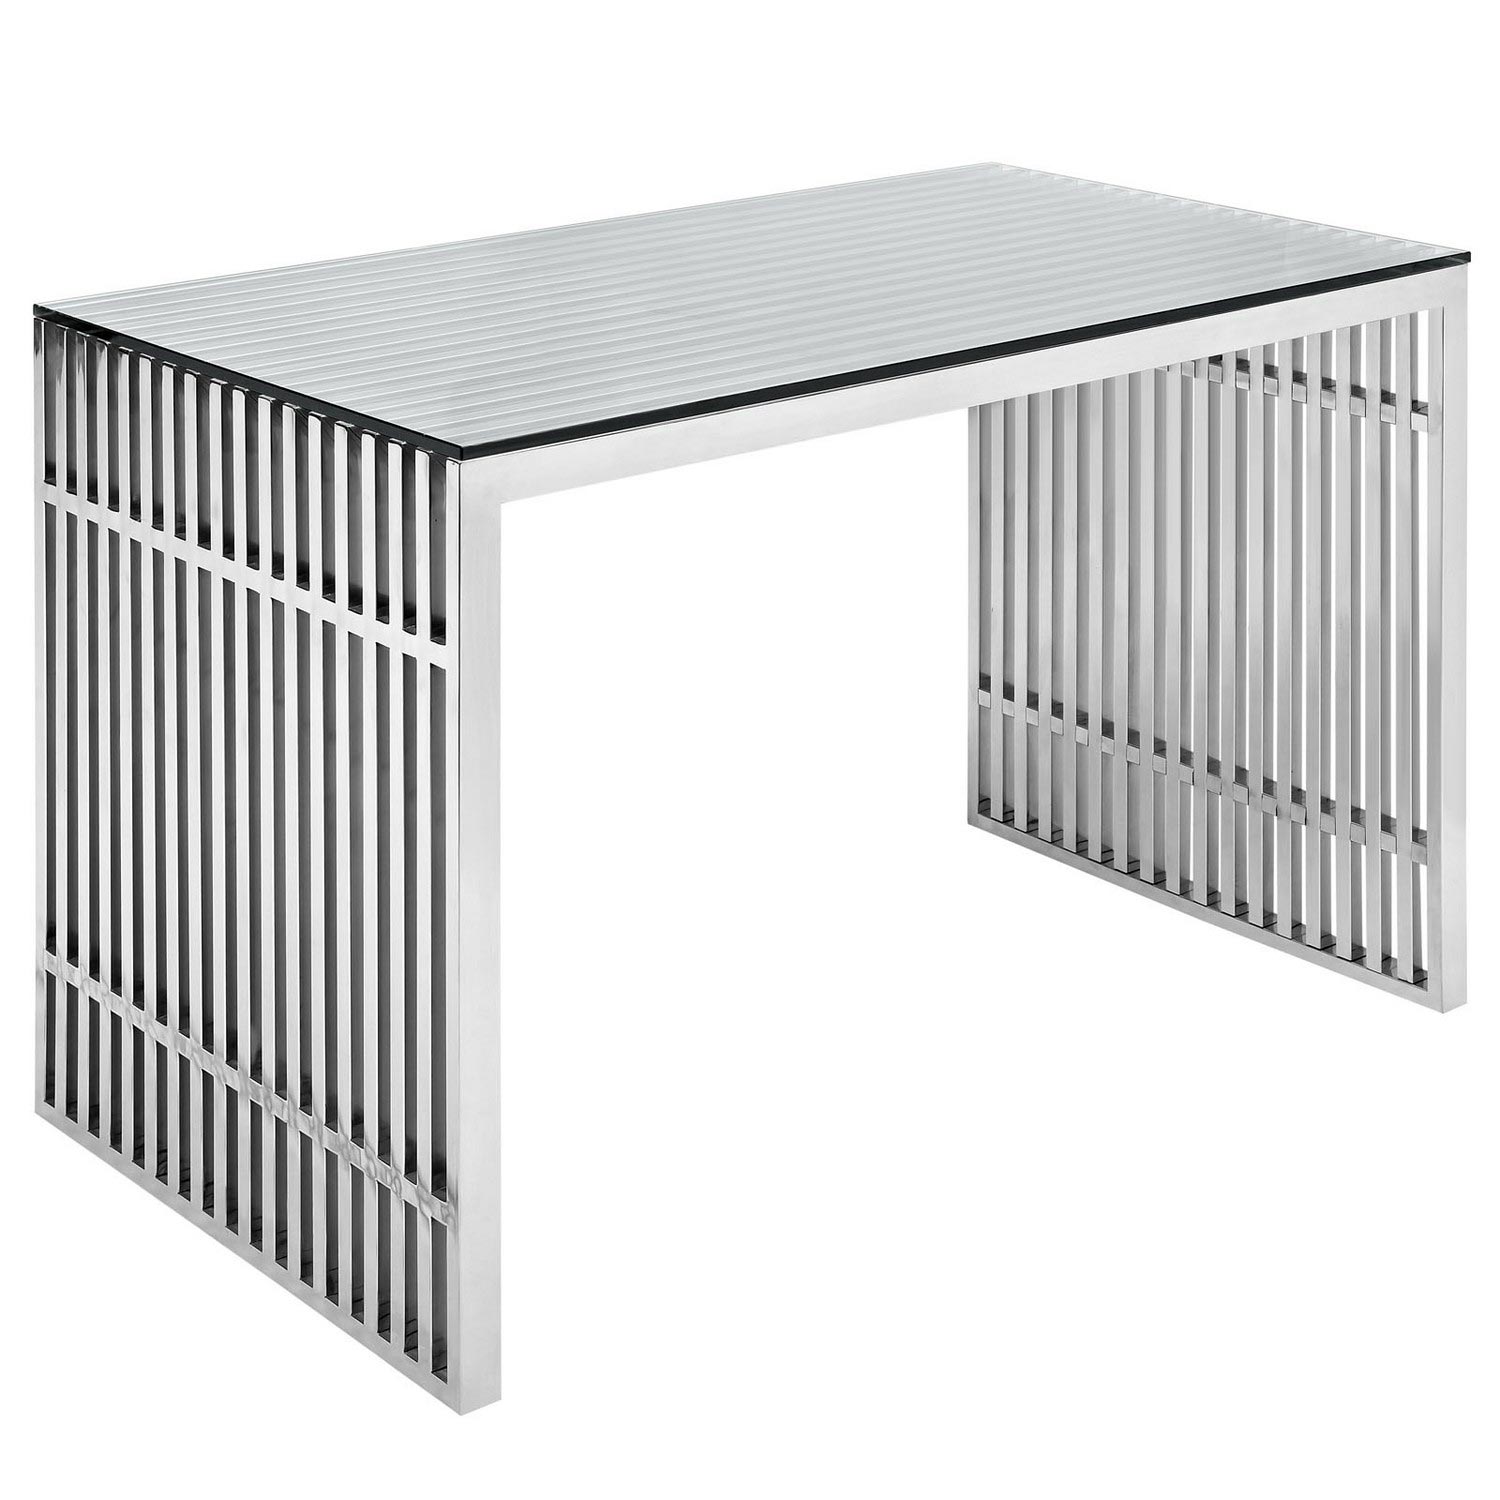 Modway Gridiron Stainless Steel Office Desk - Silver